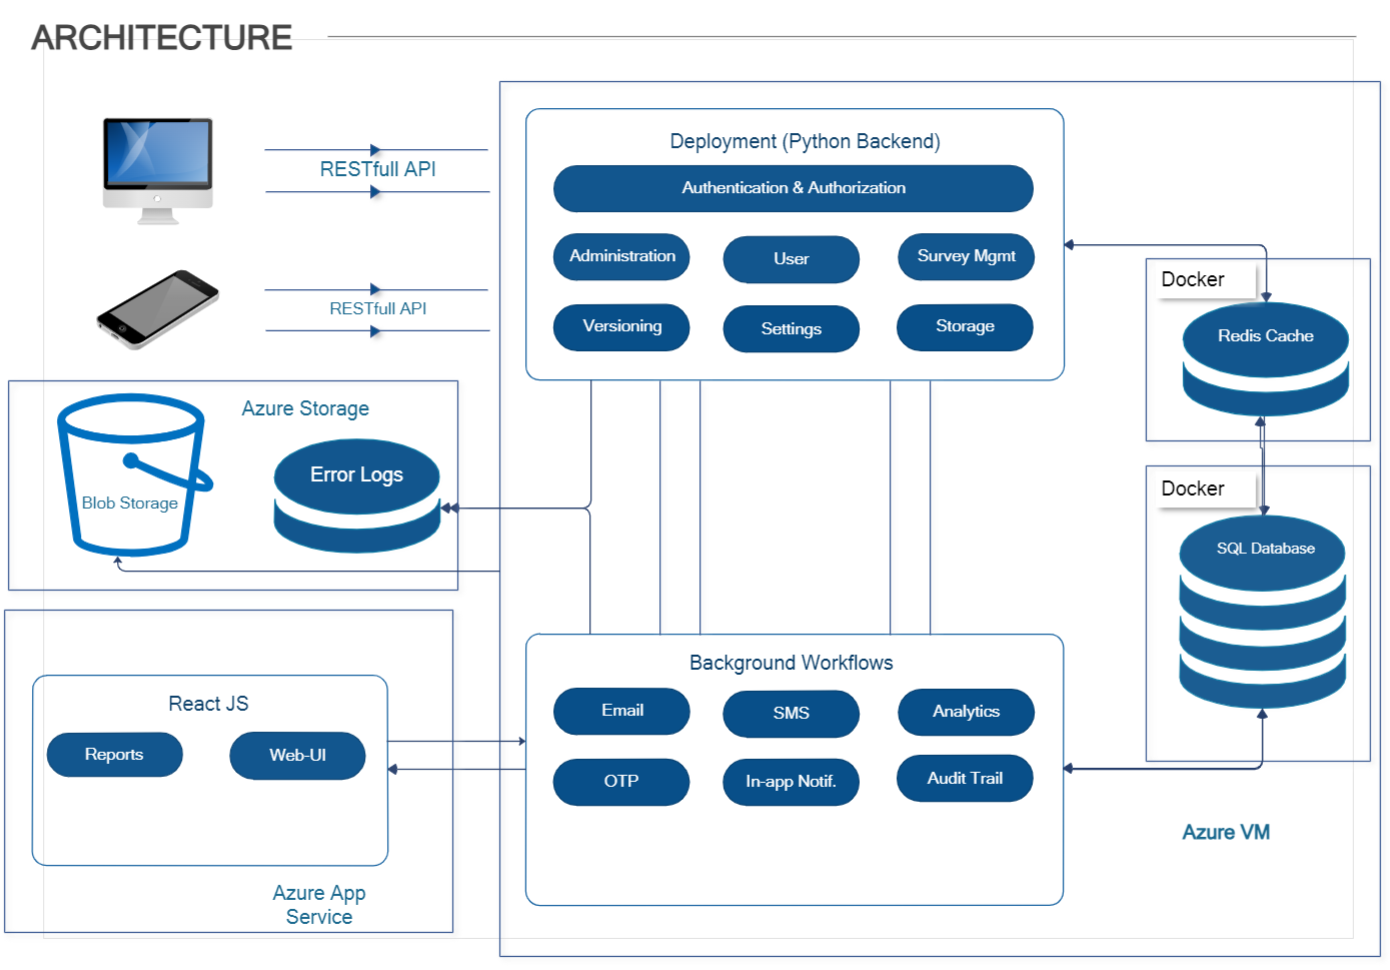 10 Enterprise Architecture Examples to Inspire Your Next Project